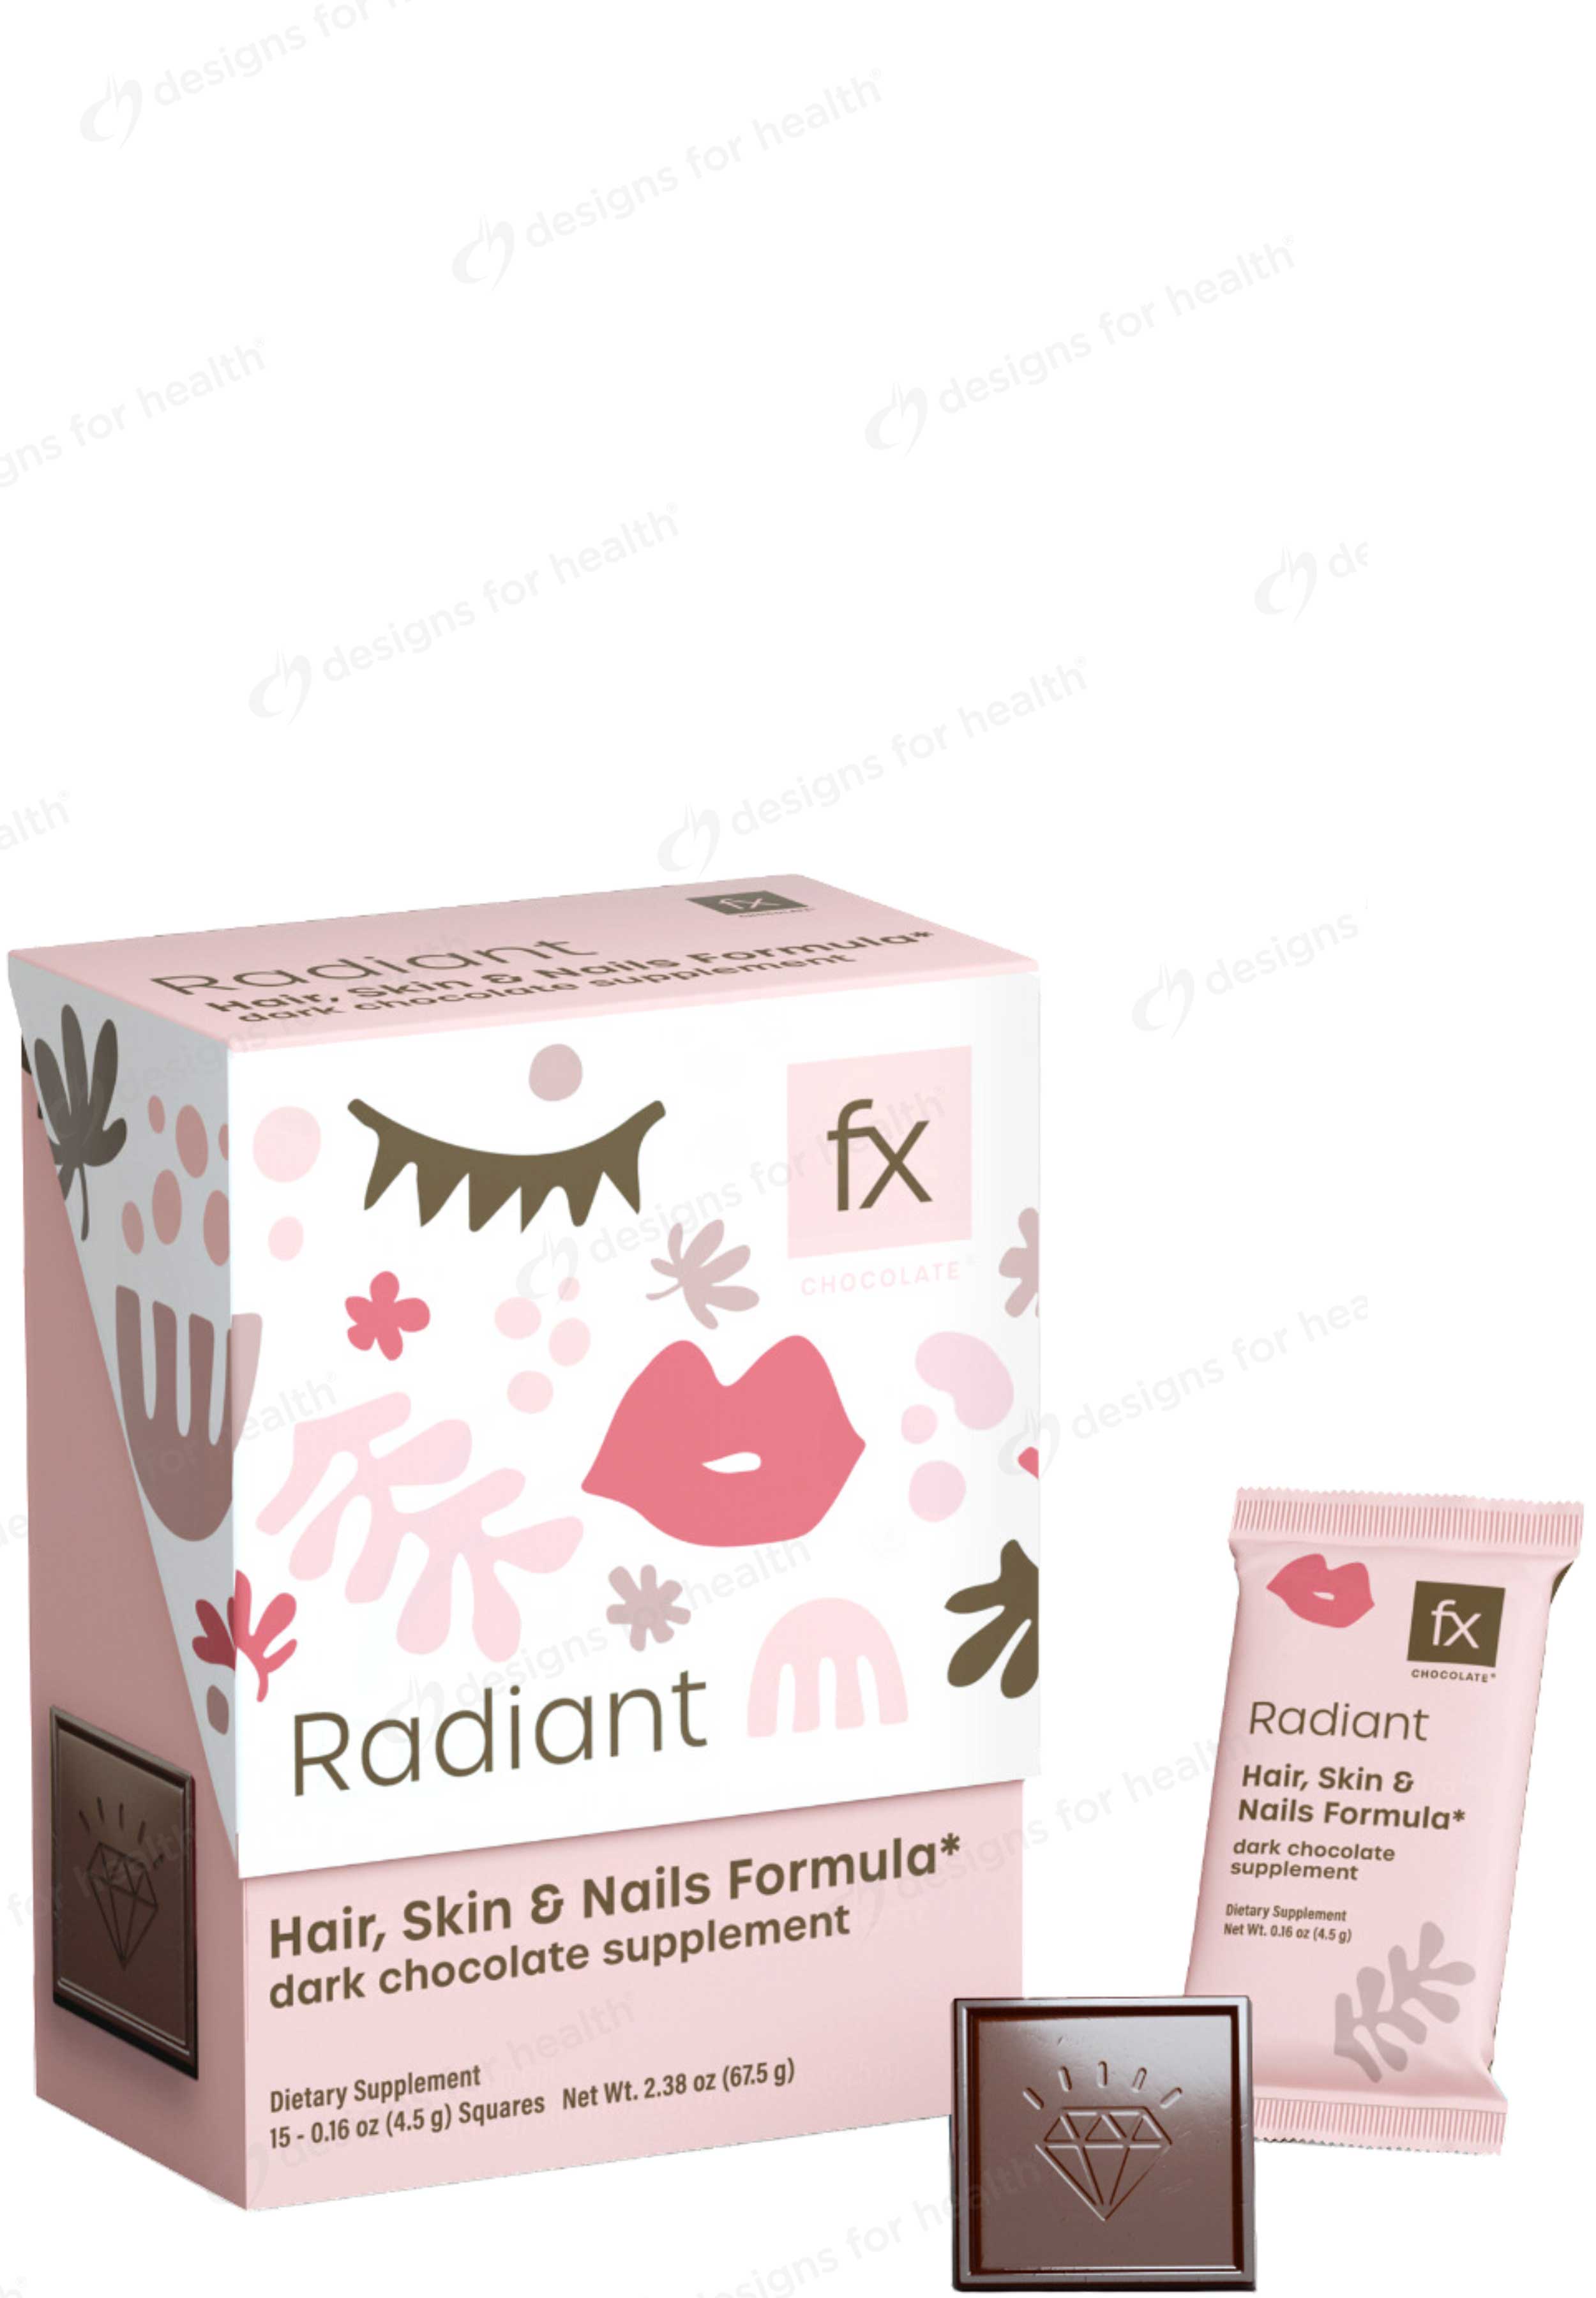 Designs for Health FX Chocolate Radiant